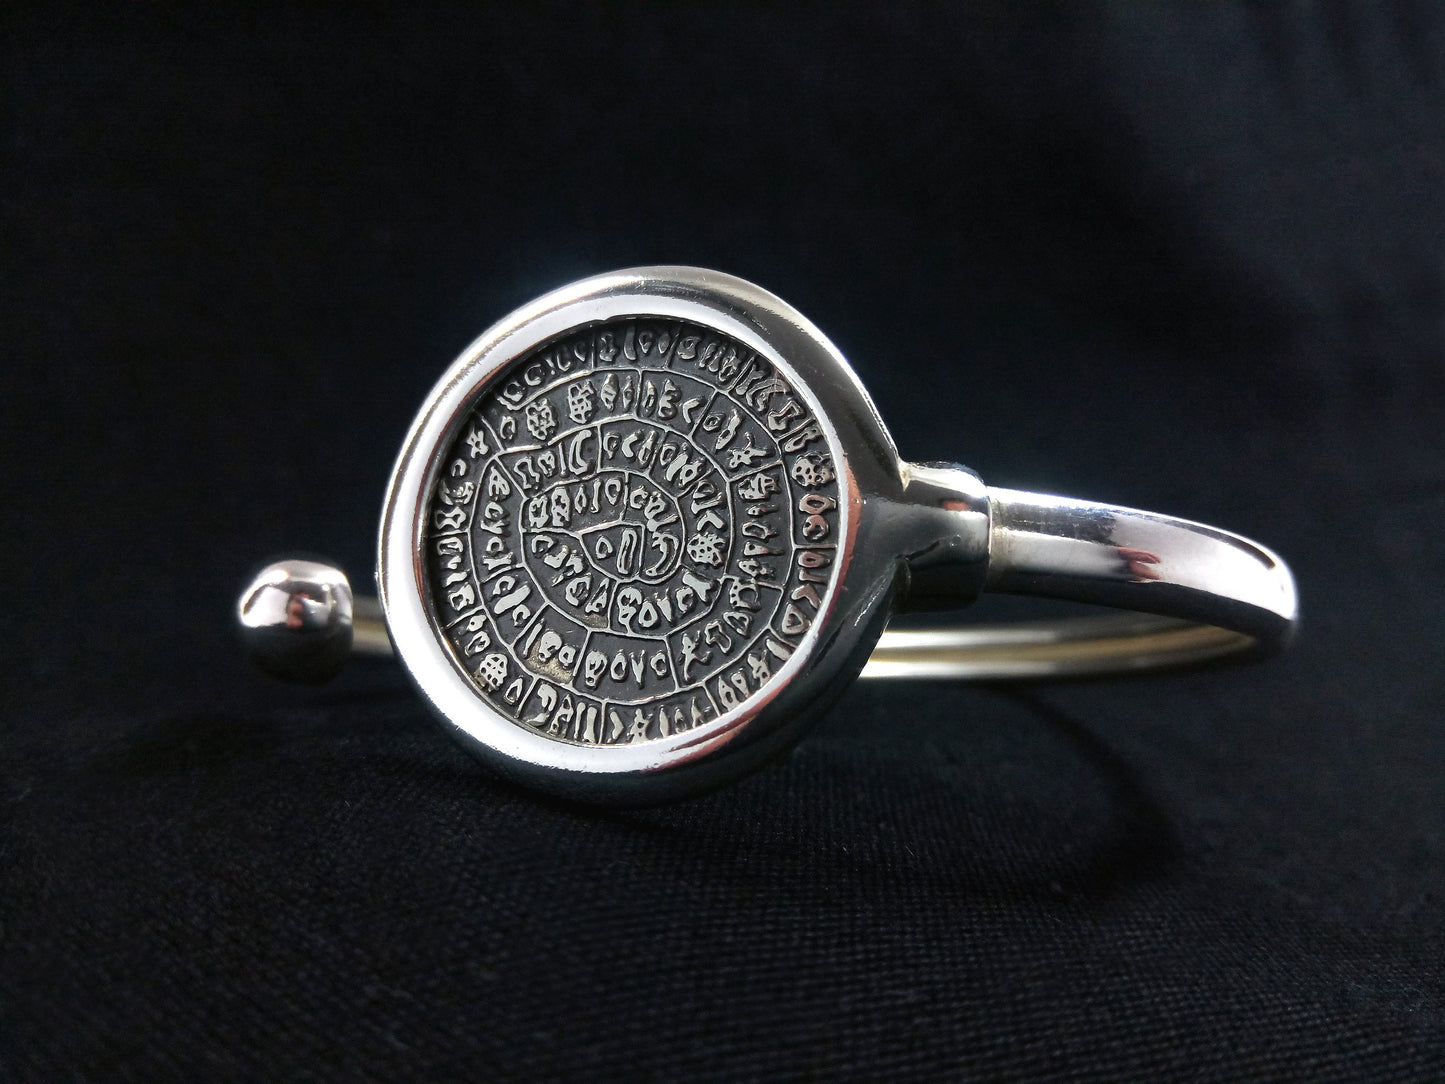 A silver cuff bracelet with the Phaistos Disc